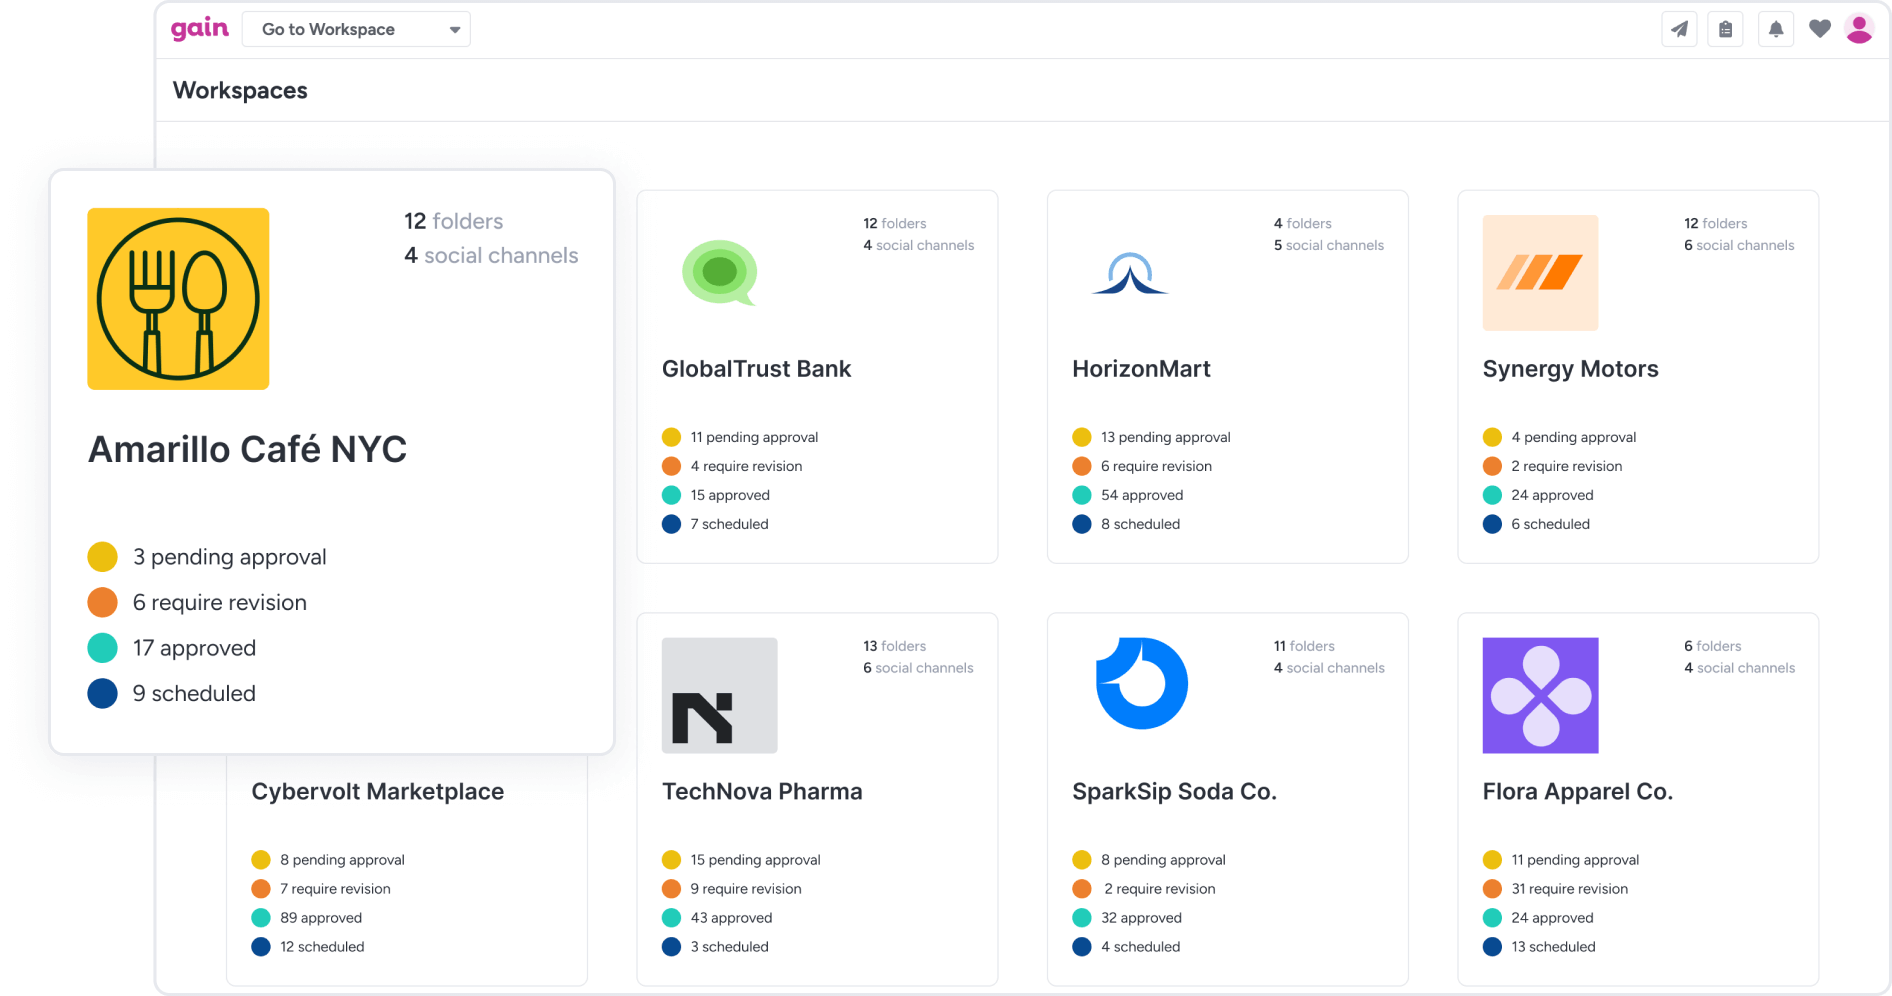 A screenshot of Gain shows individual workspaces for multiple clients or brands